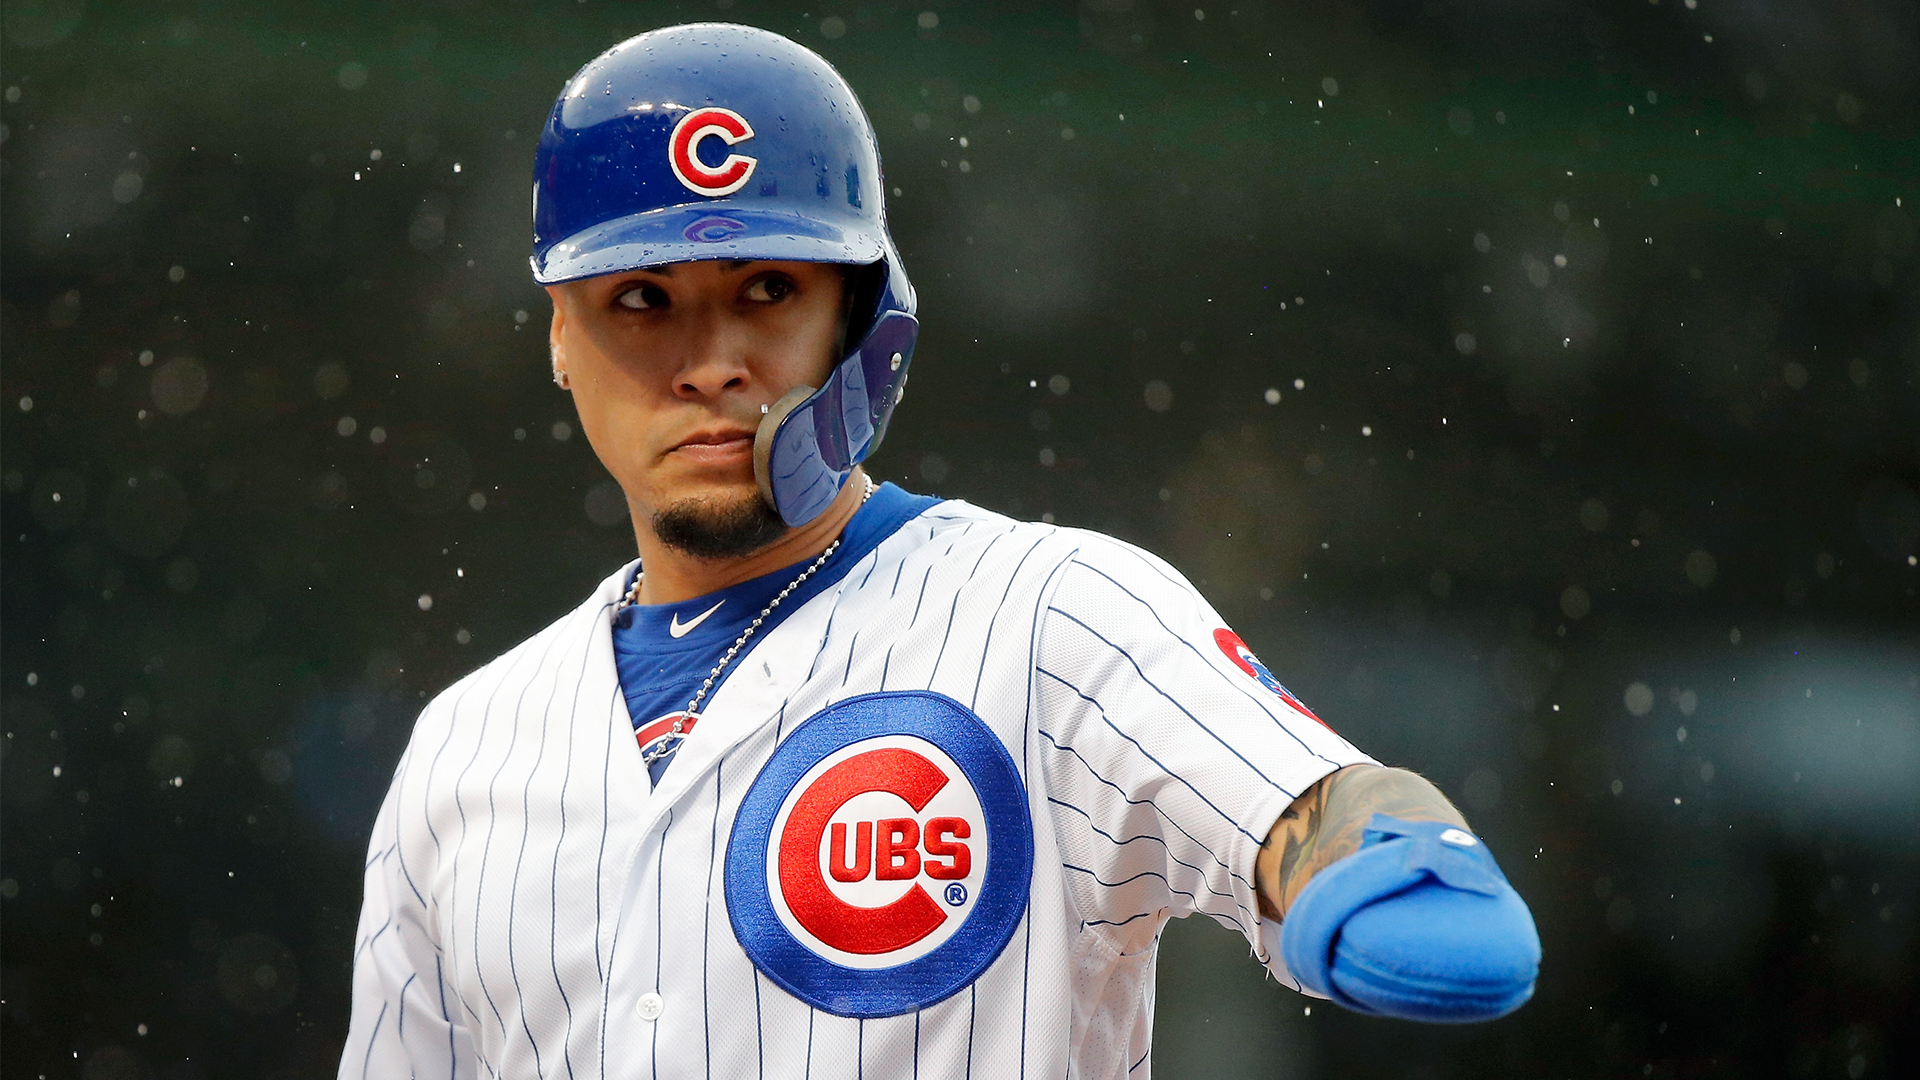 Let's celebrate Javier Baez's 25th birthday with some of our